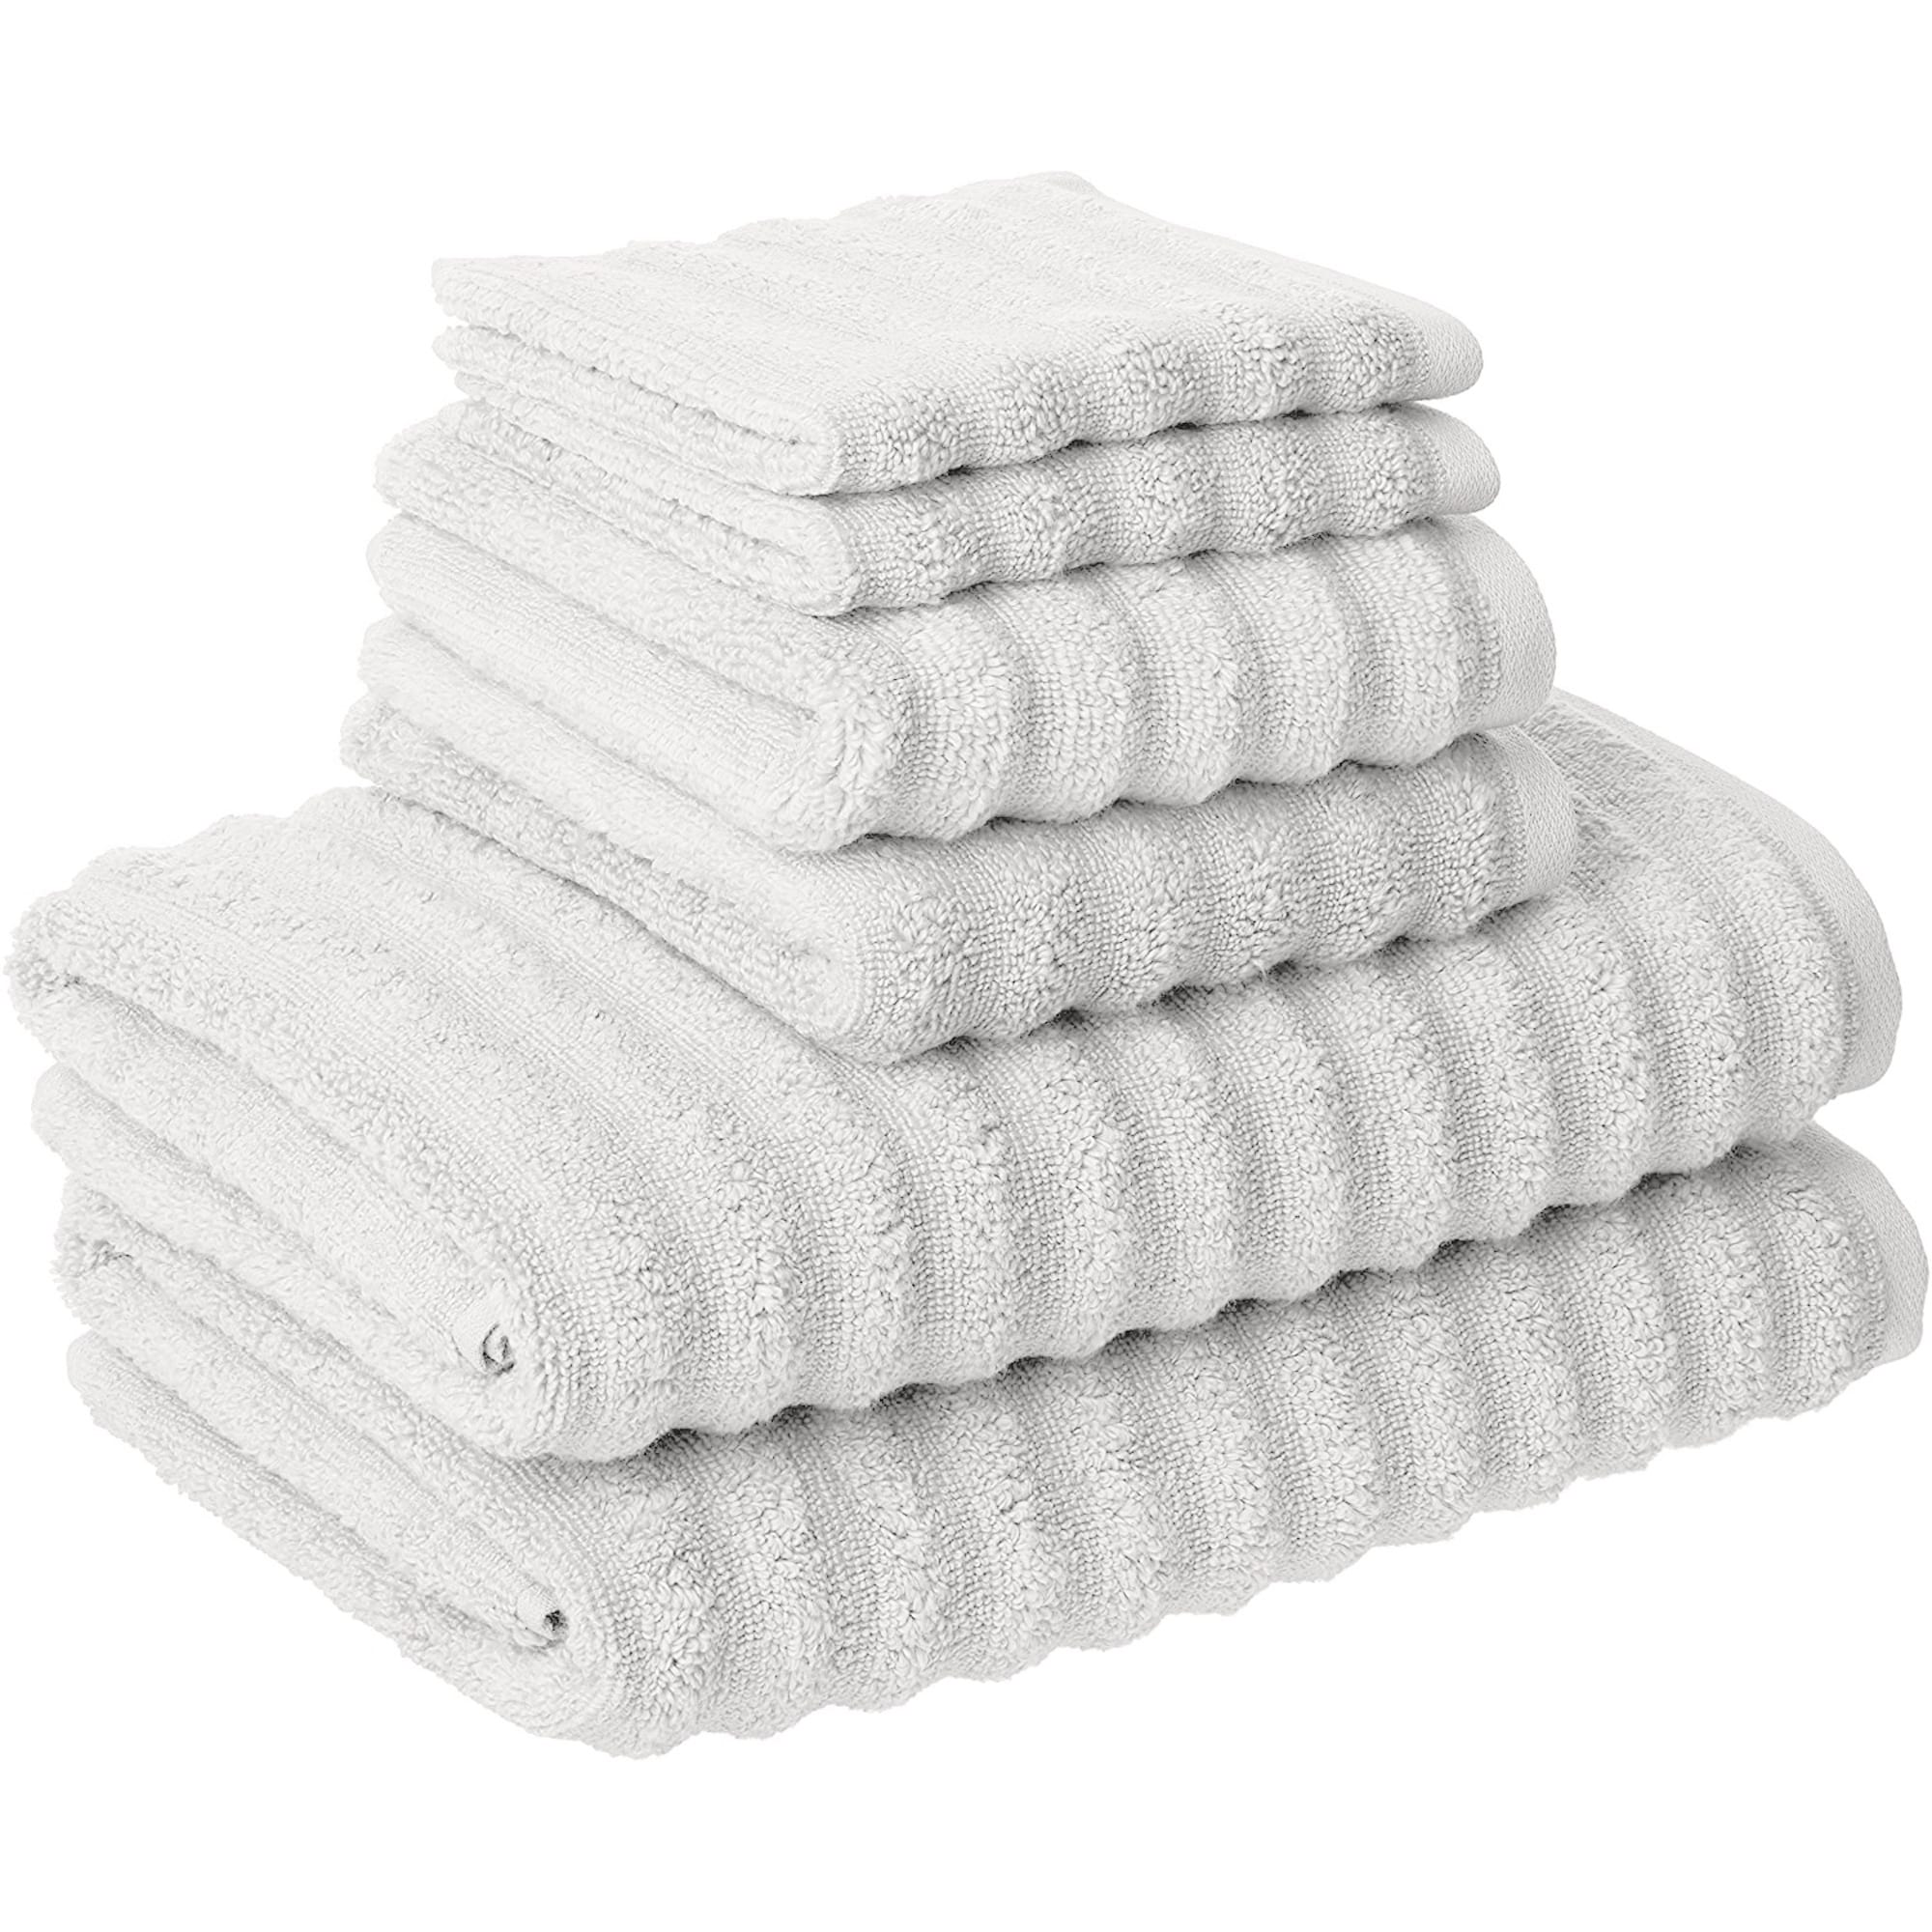 Riley Spa Towel Collection Set Of 2 Hand Towels, 100% Cotton, 20x30”, Mist  👍👍